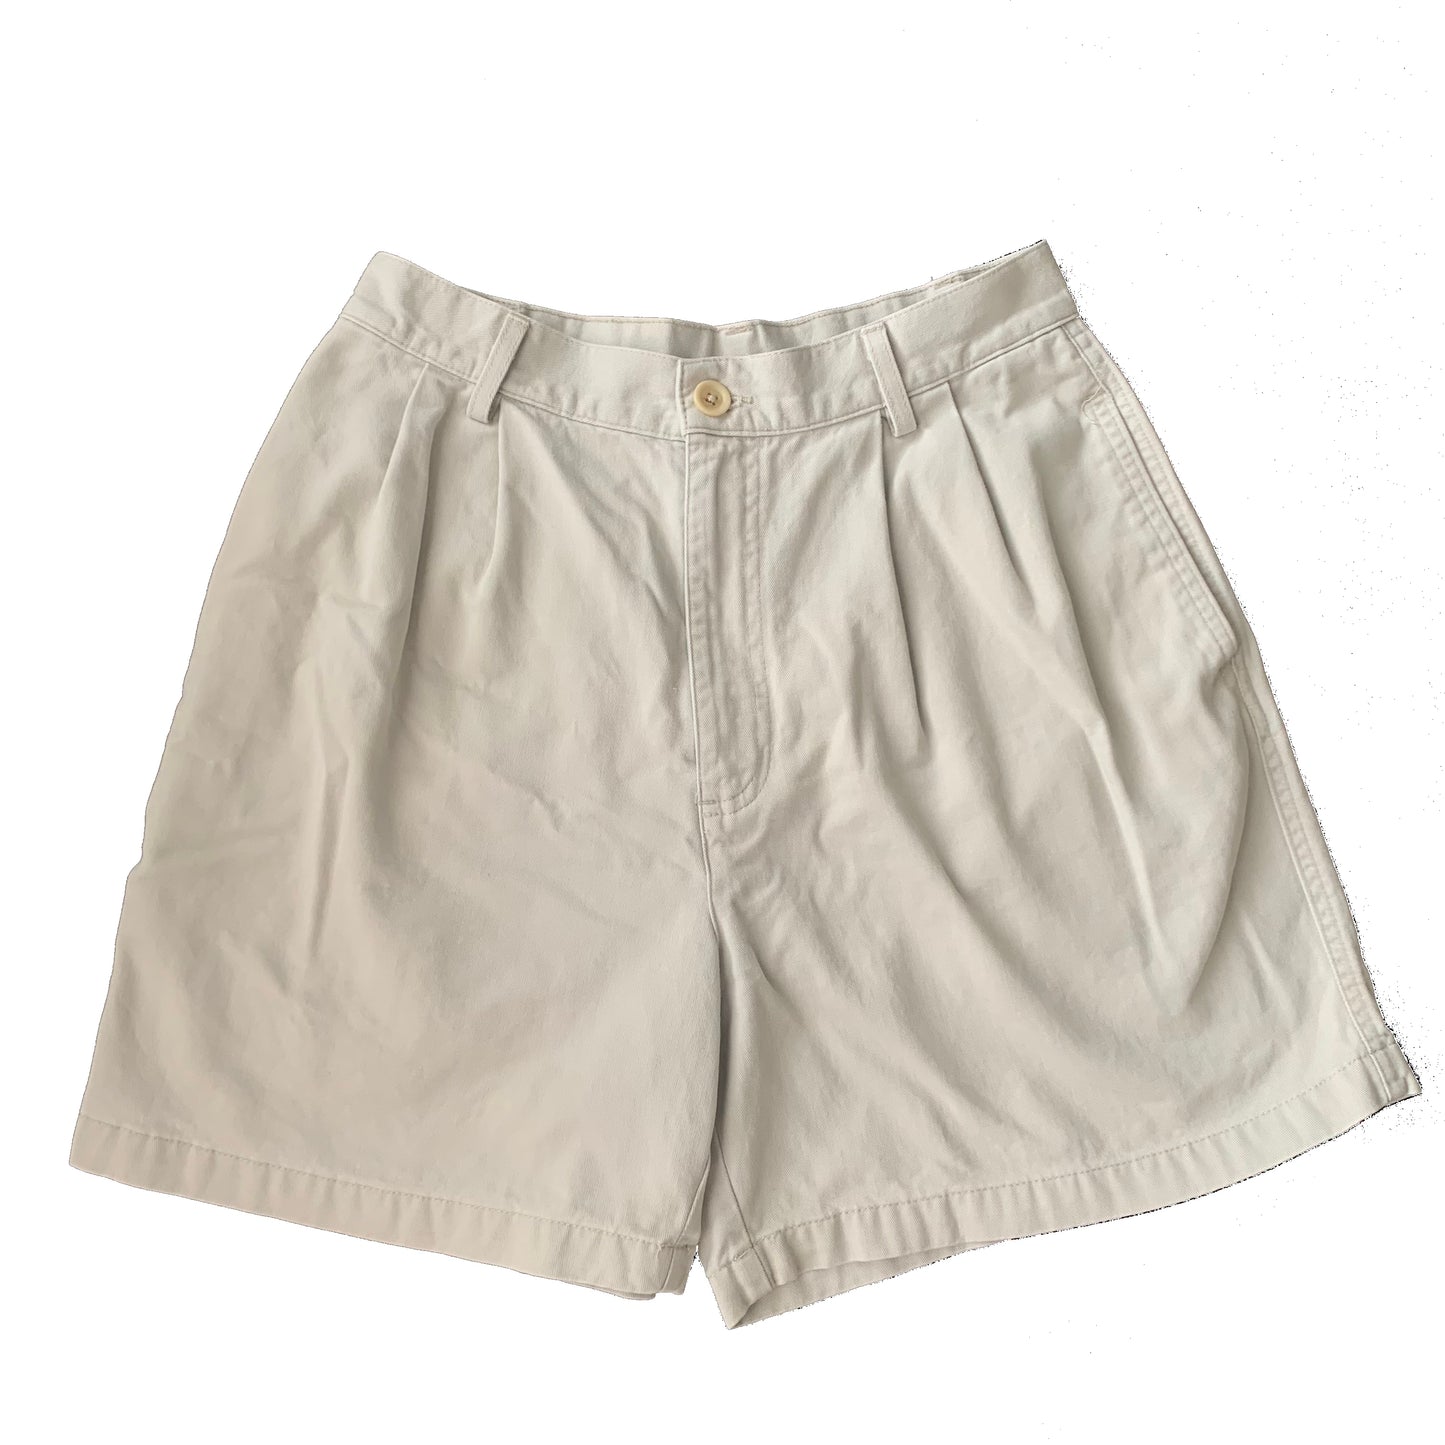 90s High Rise Khaki Trouser Shorts with Pleated Front Cotton 26”